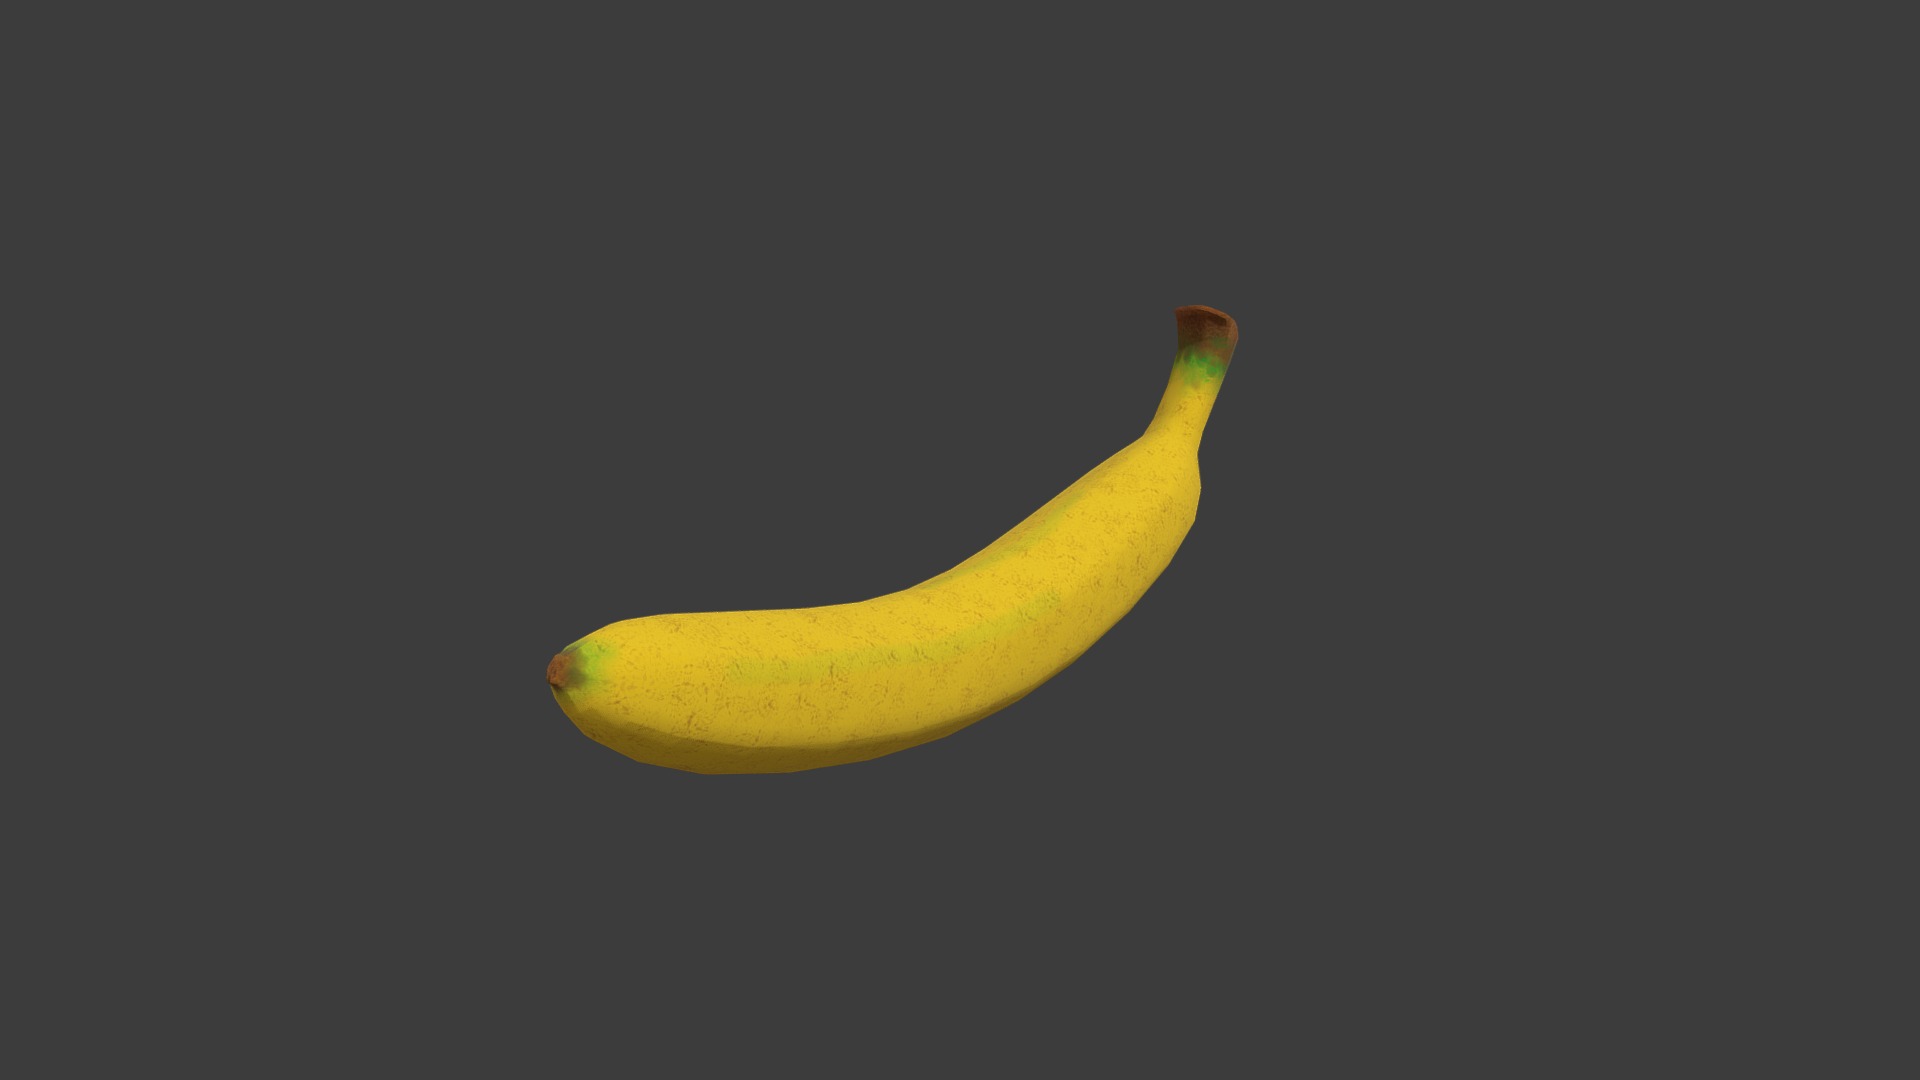 3D model banana - This is a 3D model of the banana. The 3D model is about a banana on a black background.